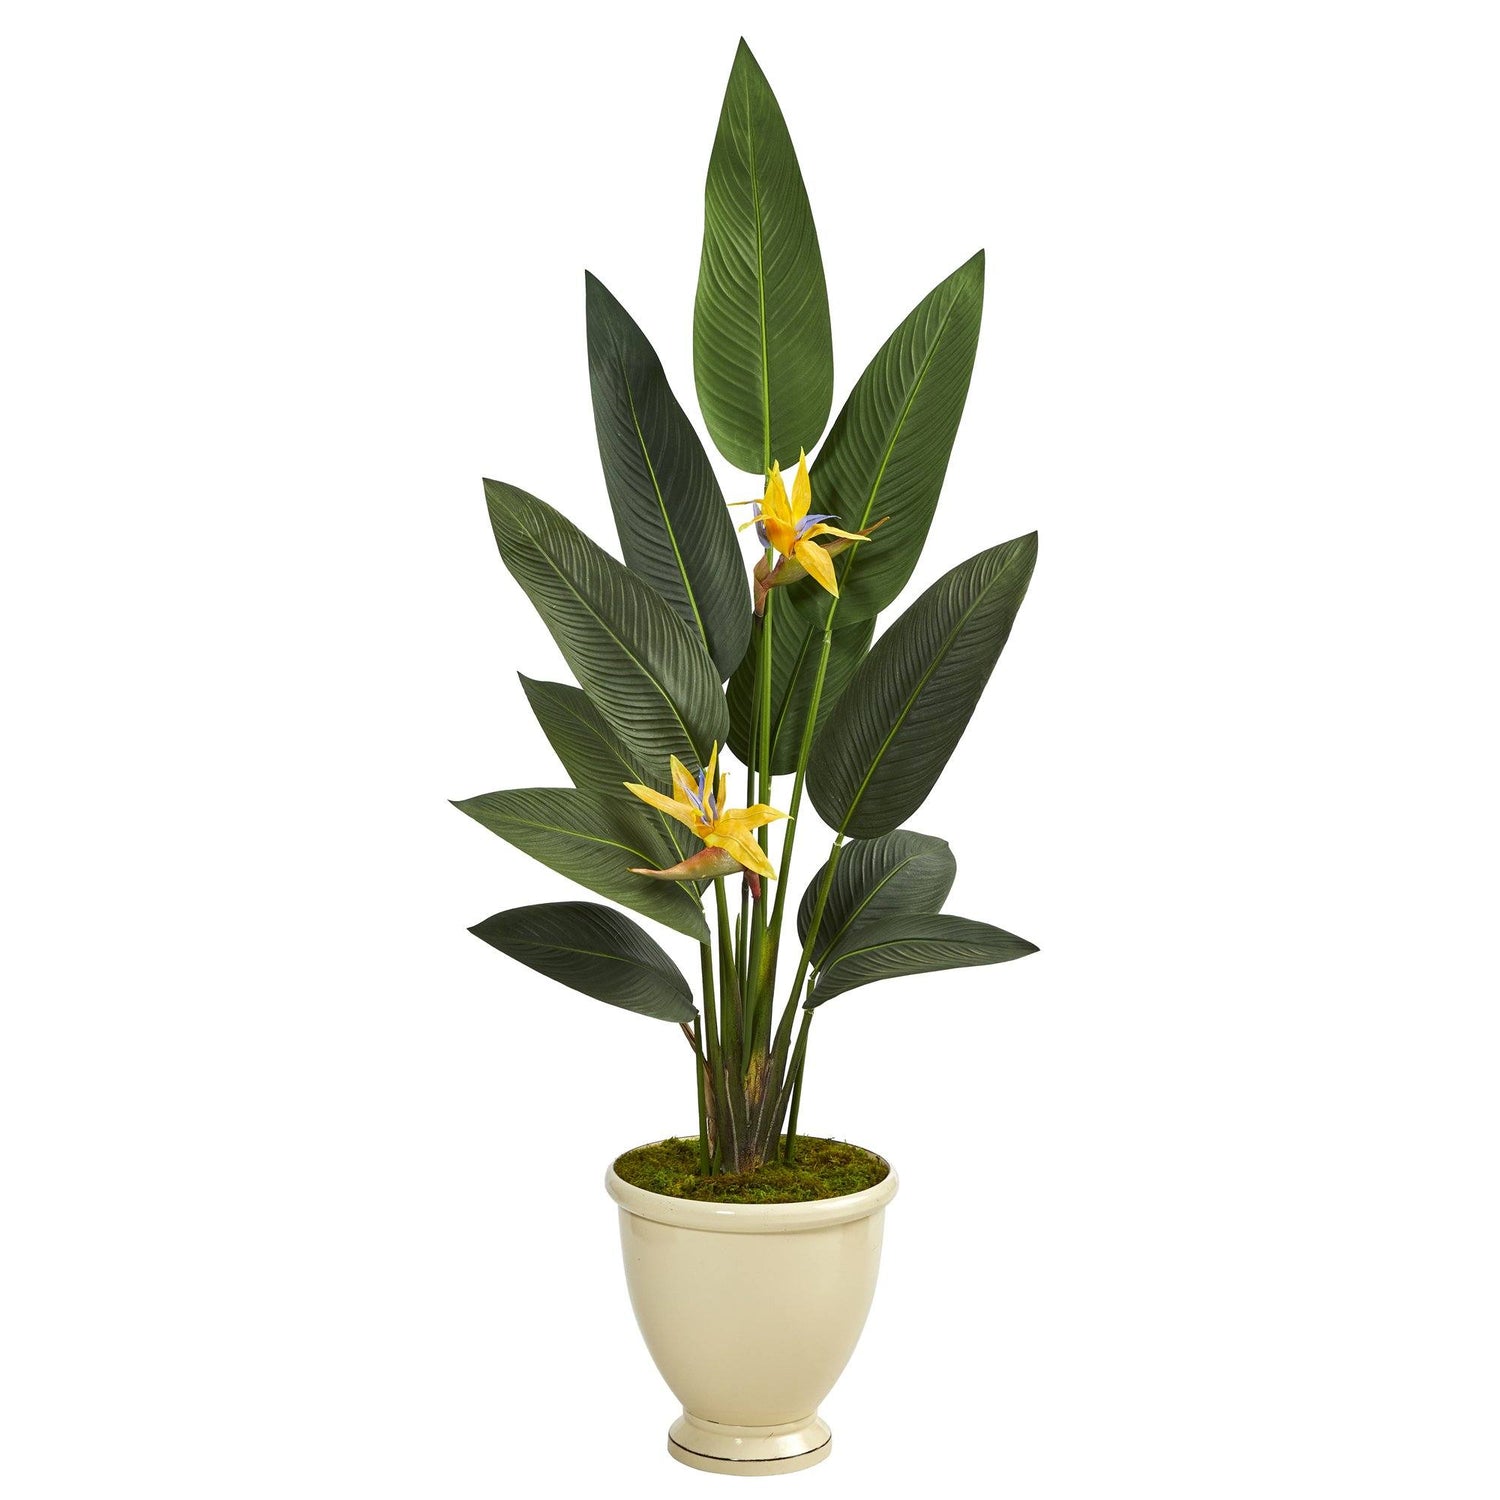 61” Bird of Paradise Artificial Plant in Decorative Urn (Real Touch)